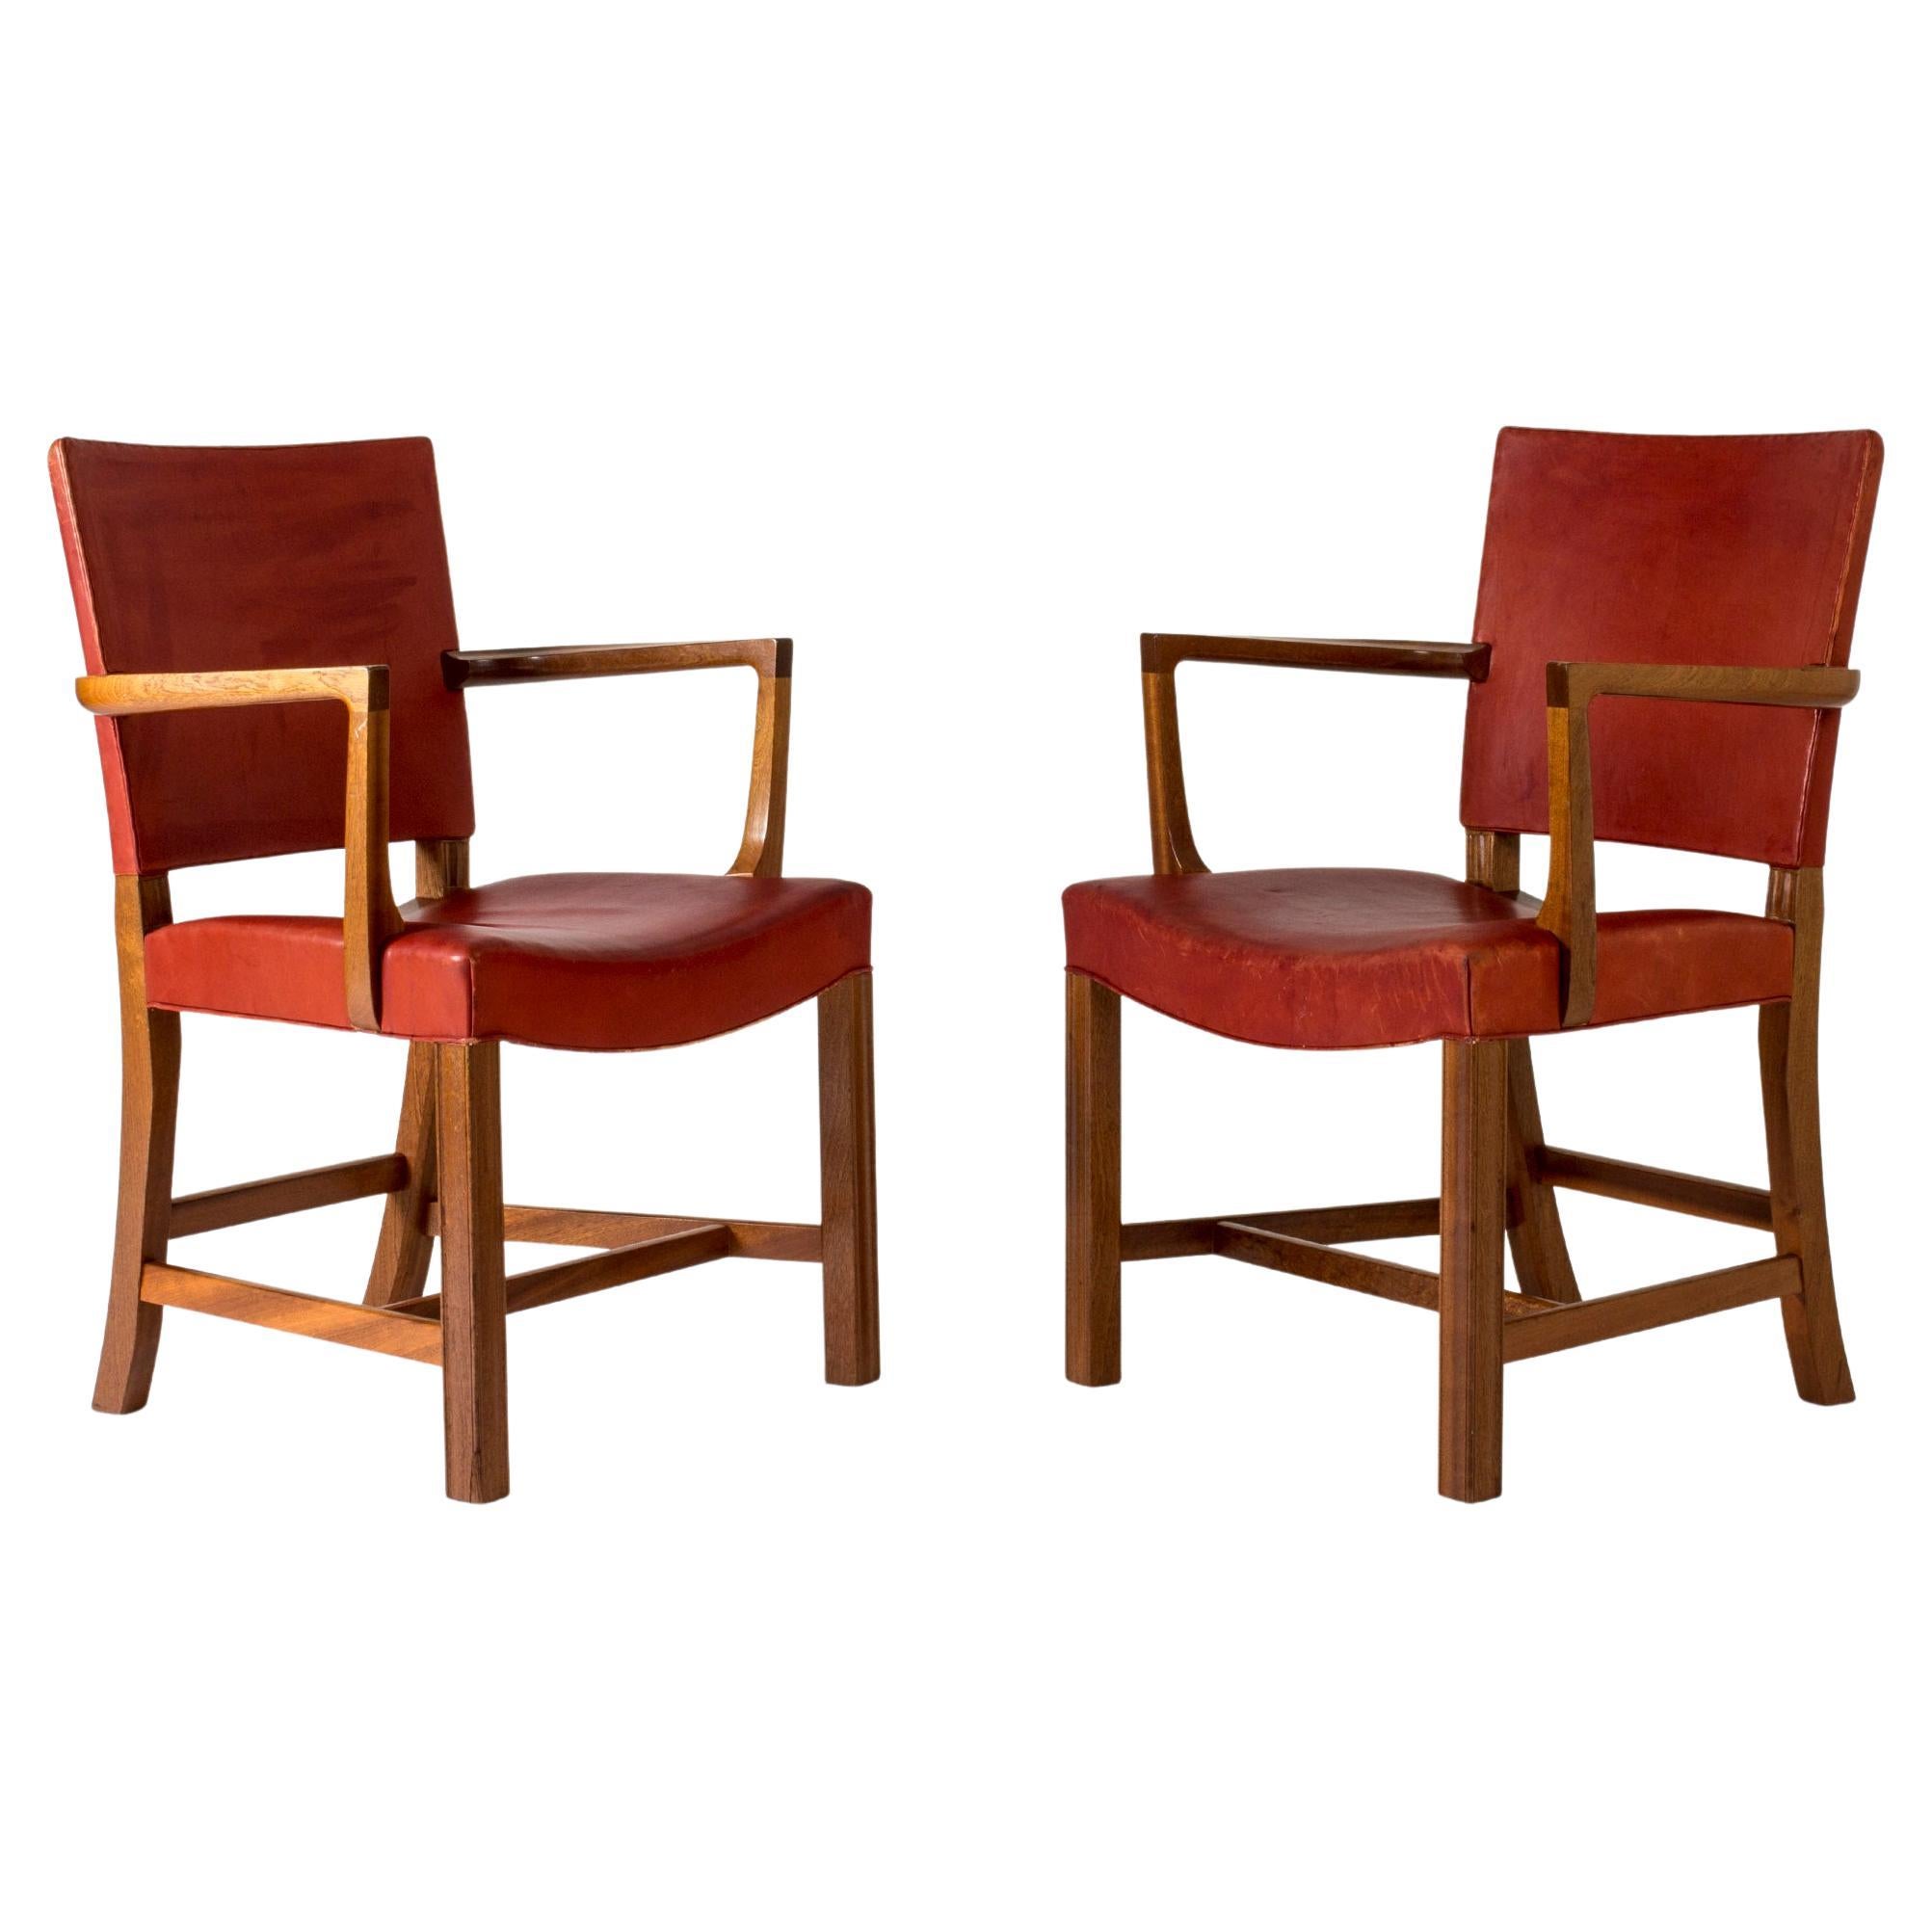 Pair of "Red Chair" Armchairs by Kaare Klint, Denmark, 1950s